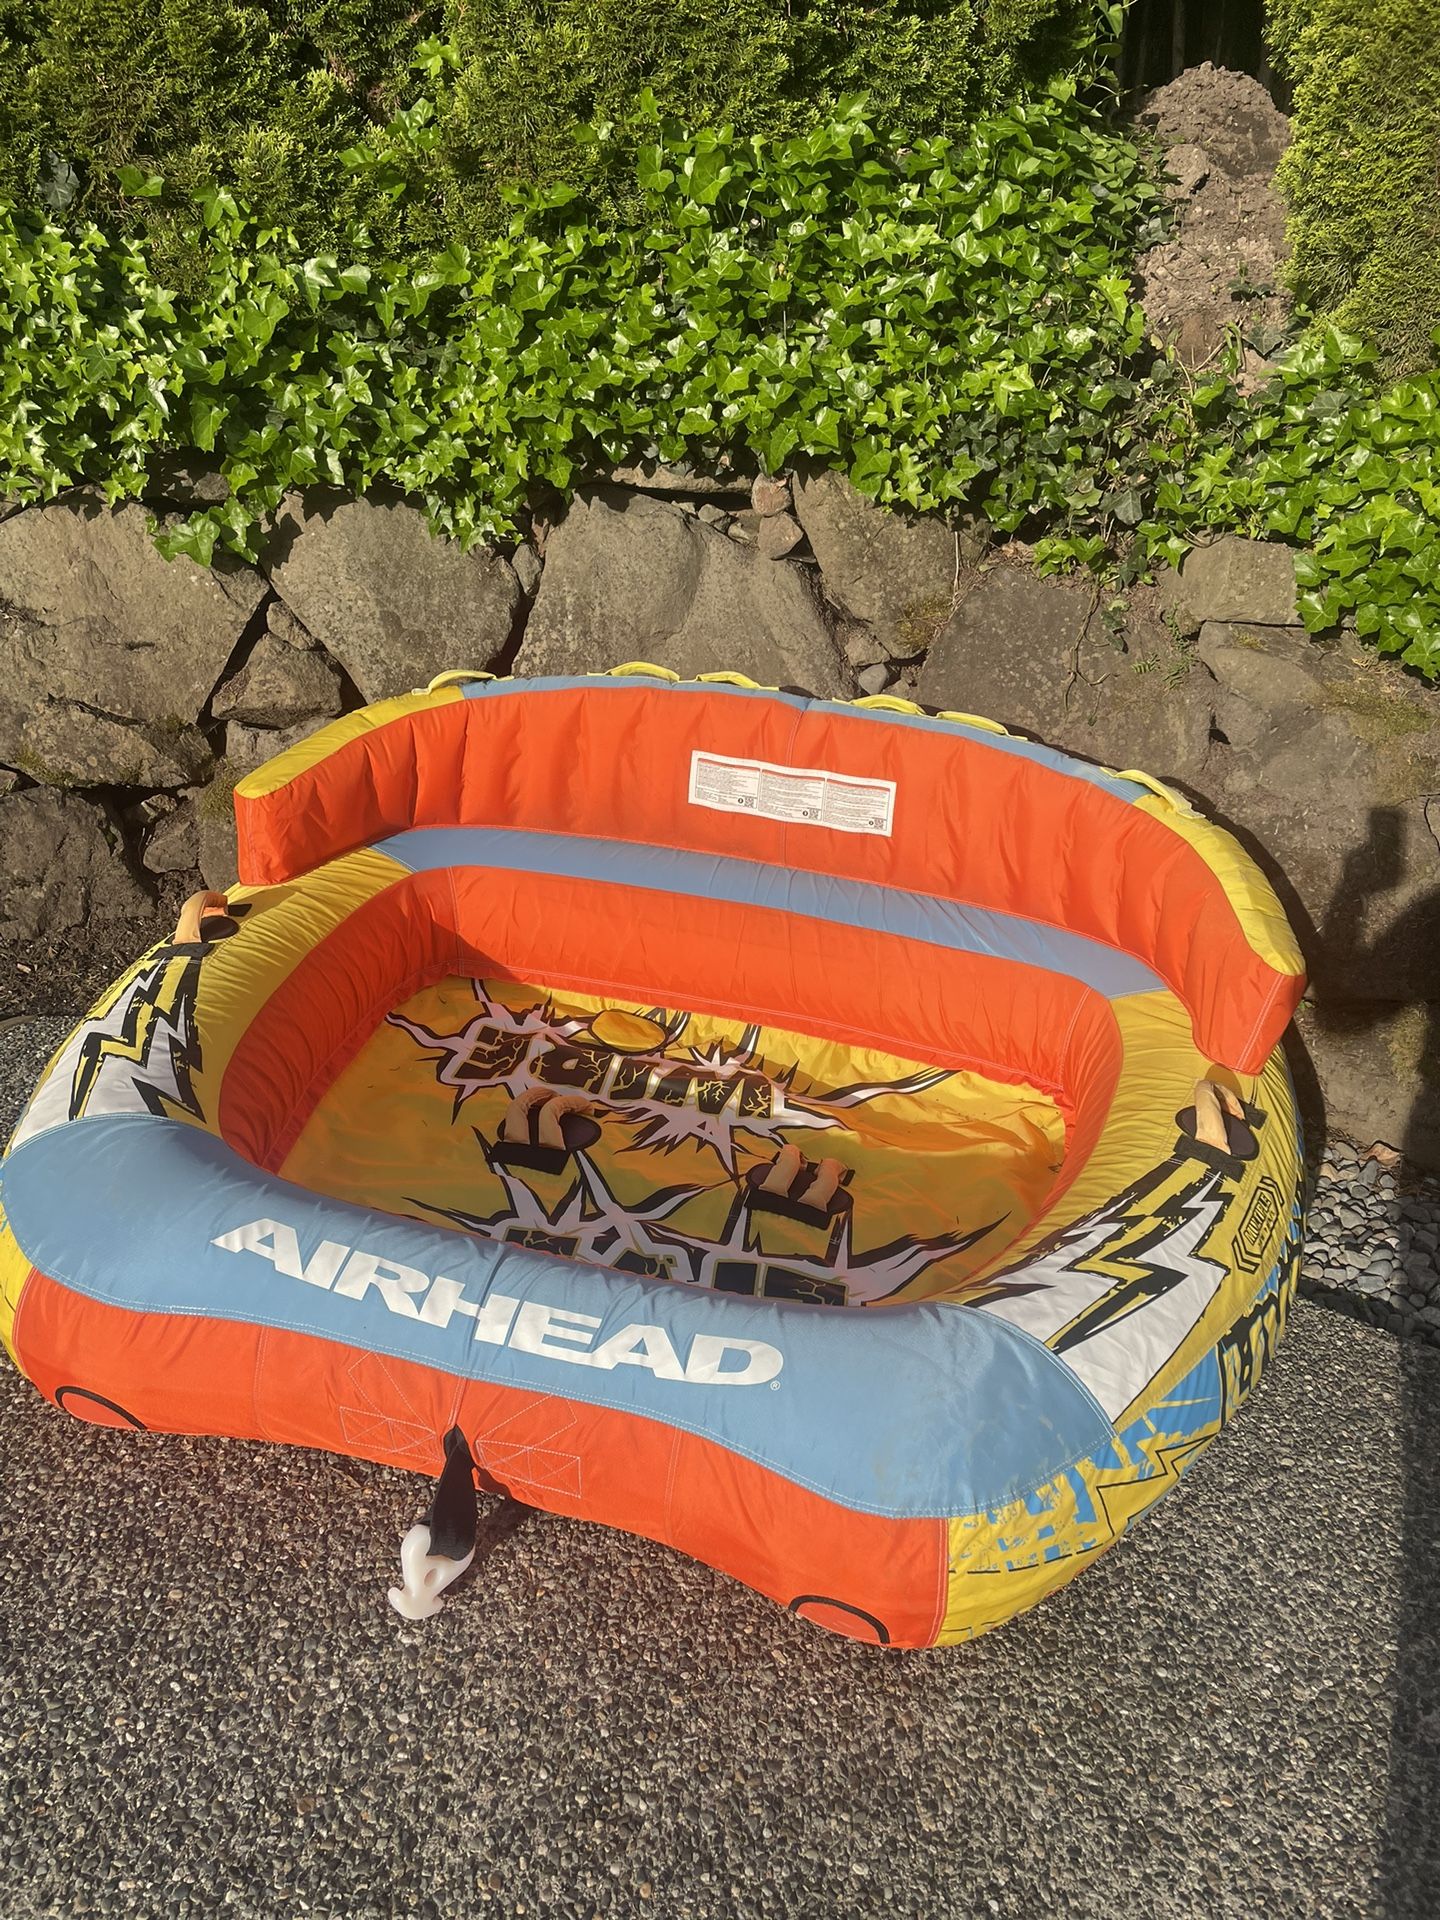 Airhead 3 Person Boater Tubes ($400 New)